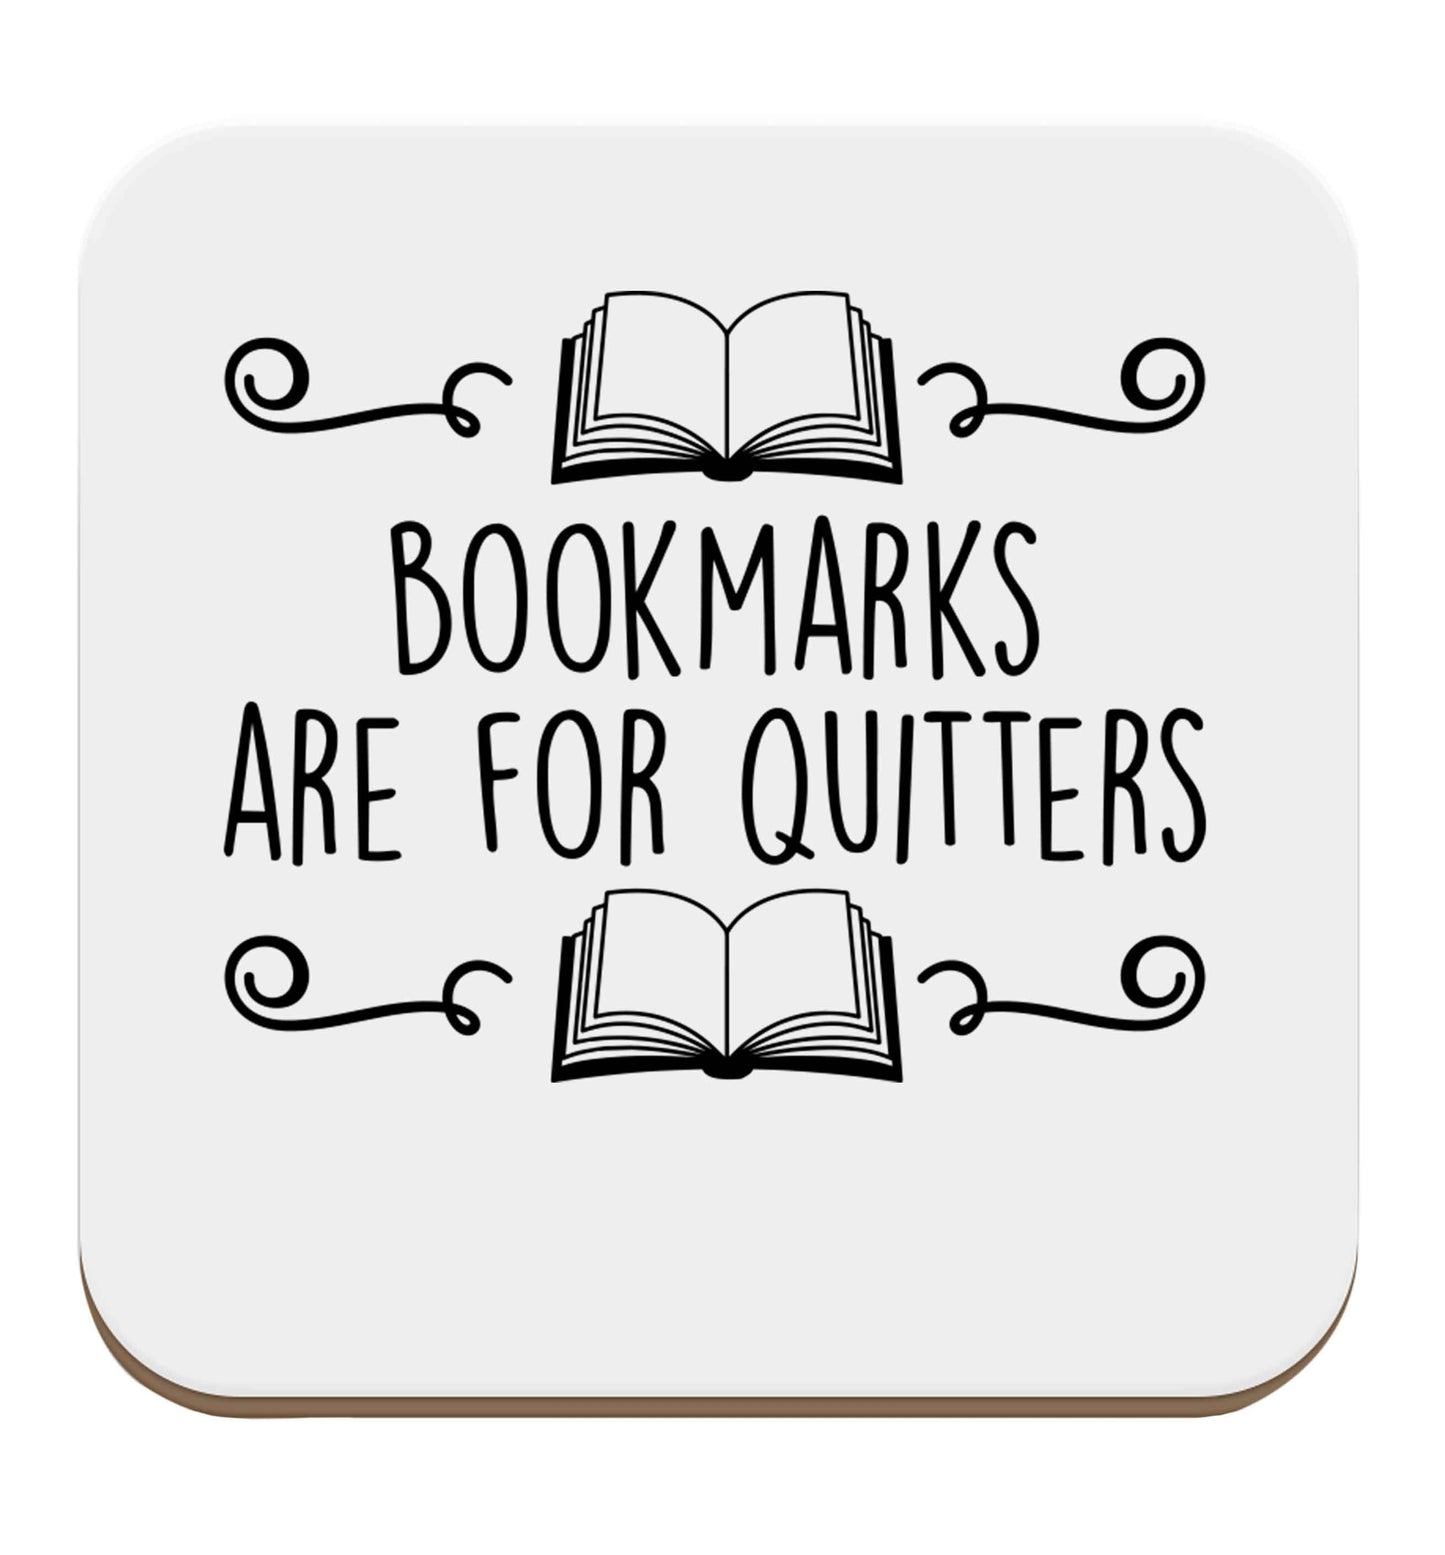 Bookmarks are for quitters set of four coasters